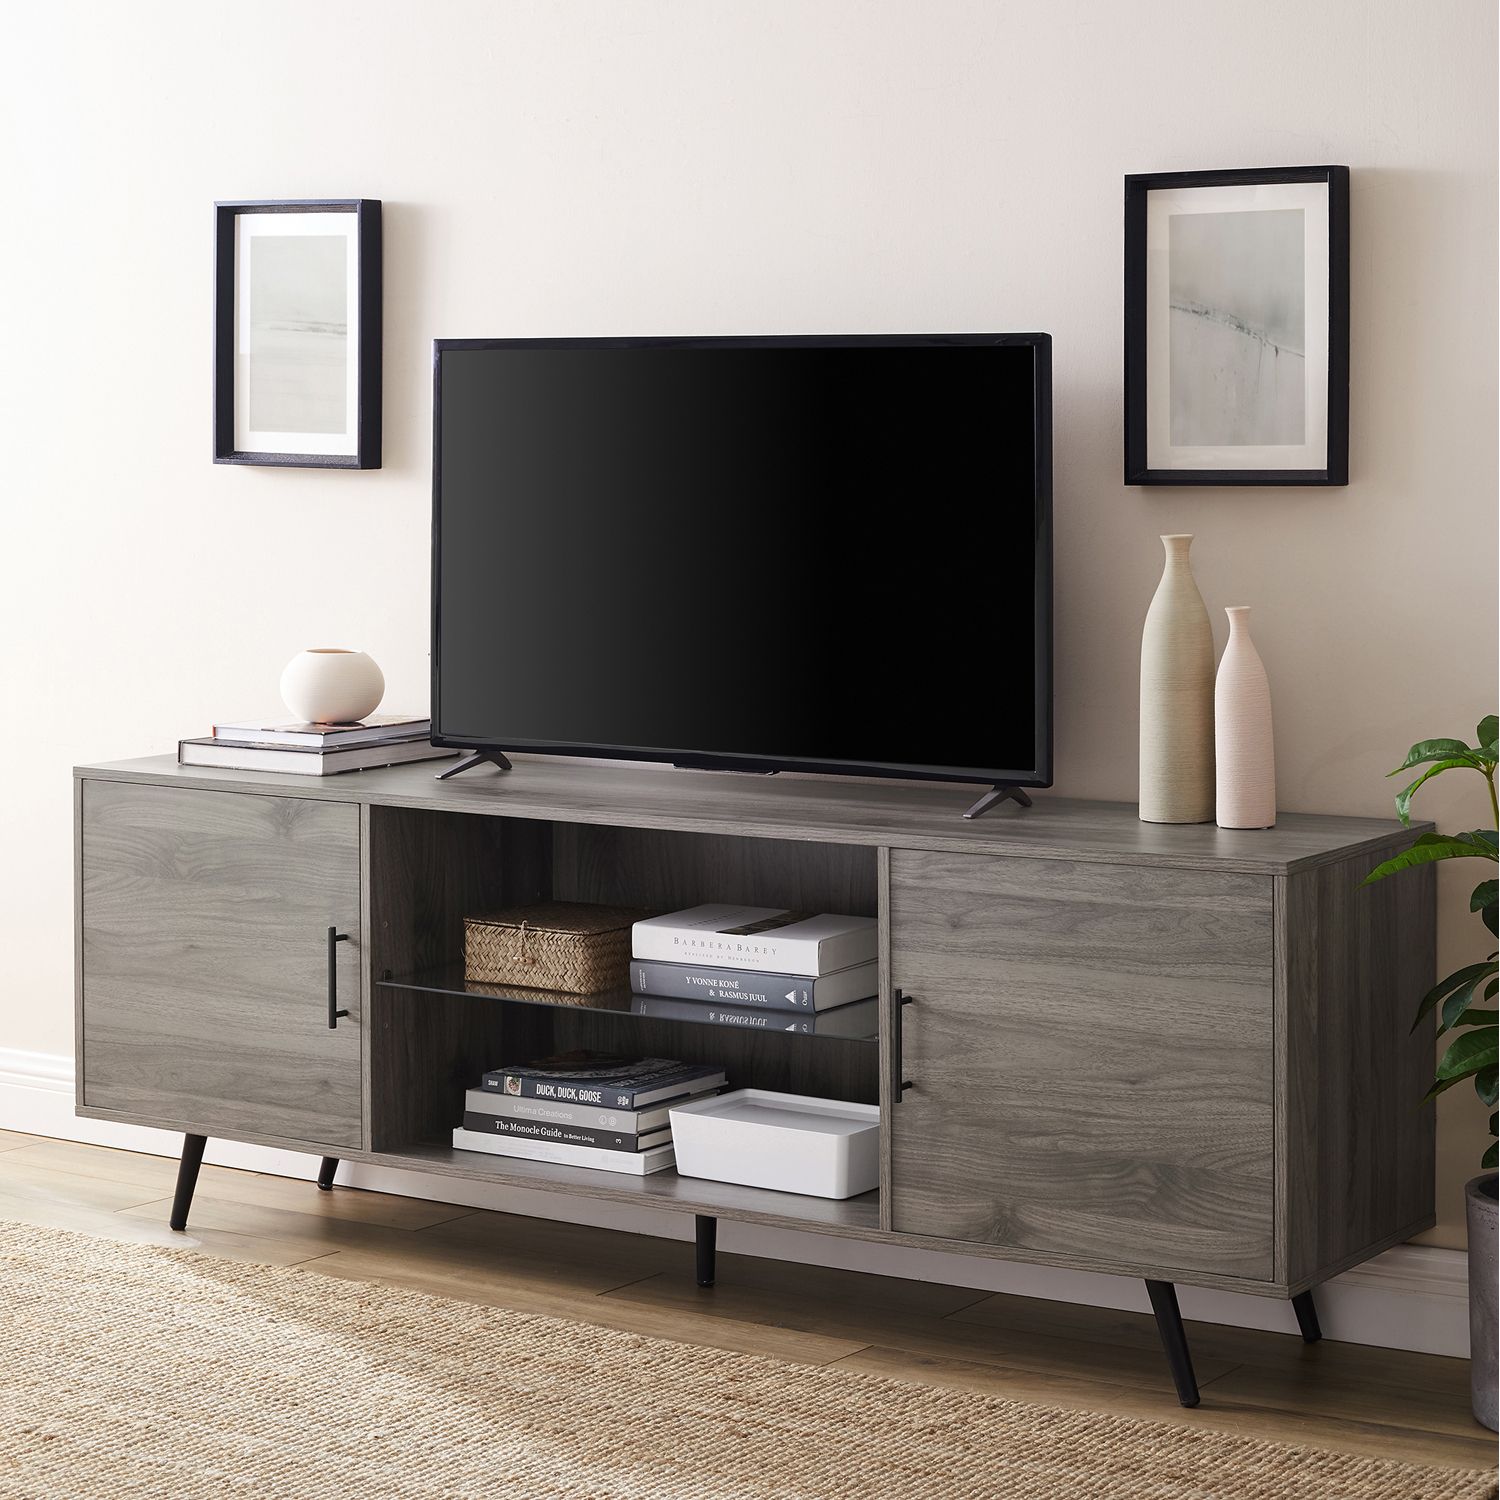 Wide Tv Stand With Glass Shelf – Pier1 Regarding Copen Wide Tv Stands (View 4 of 15)